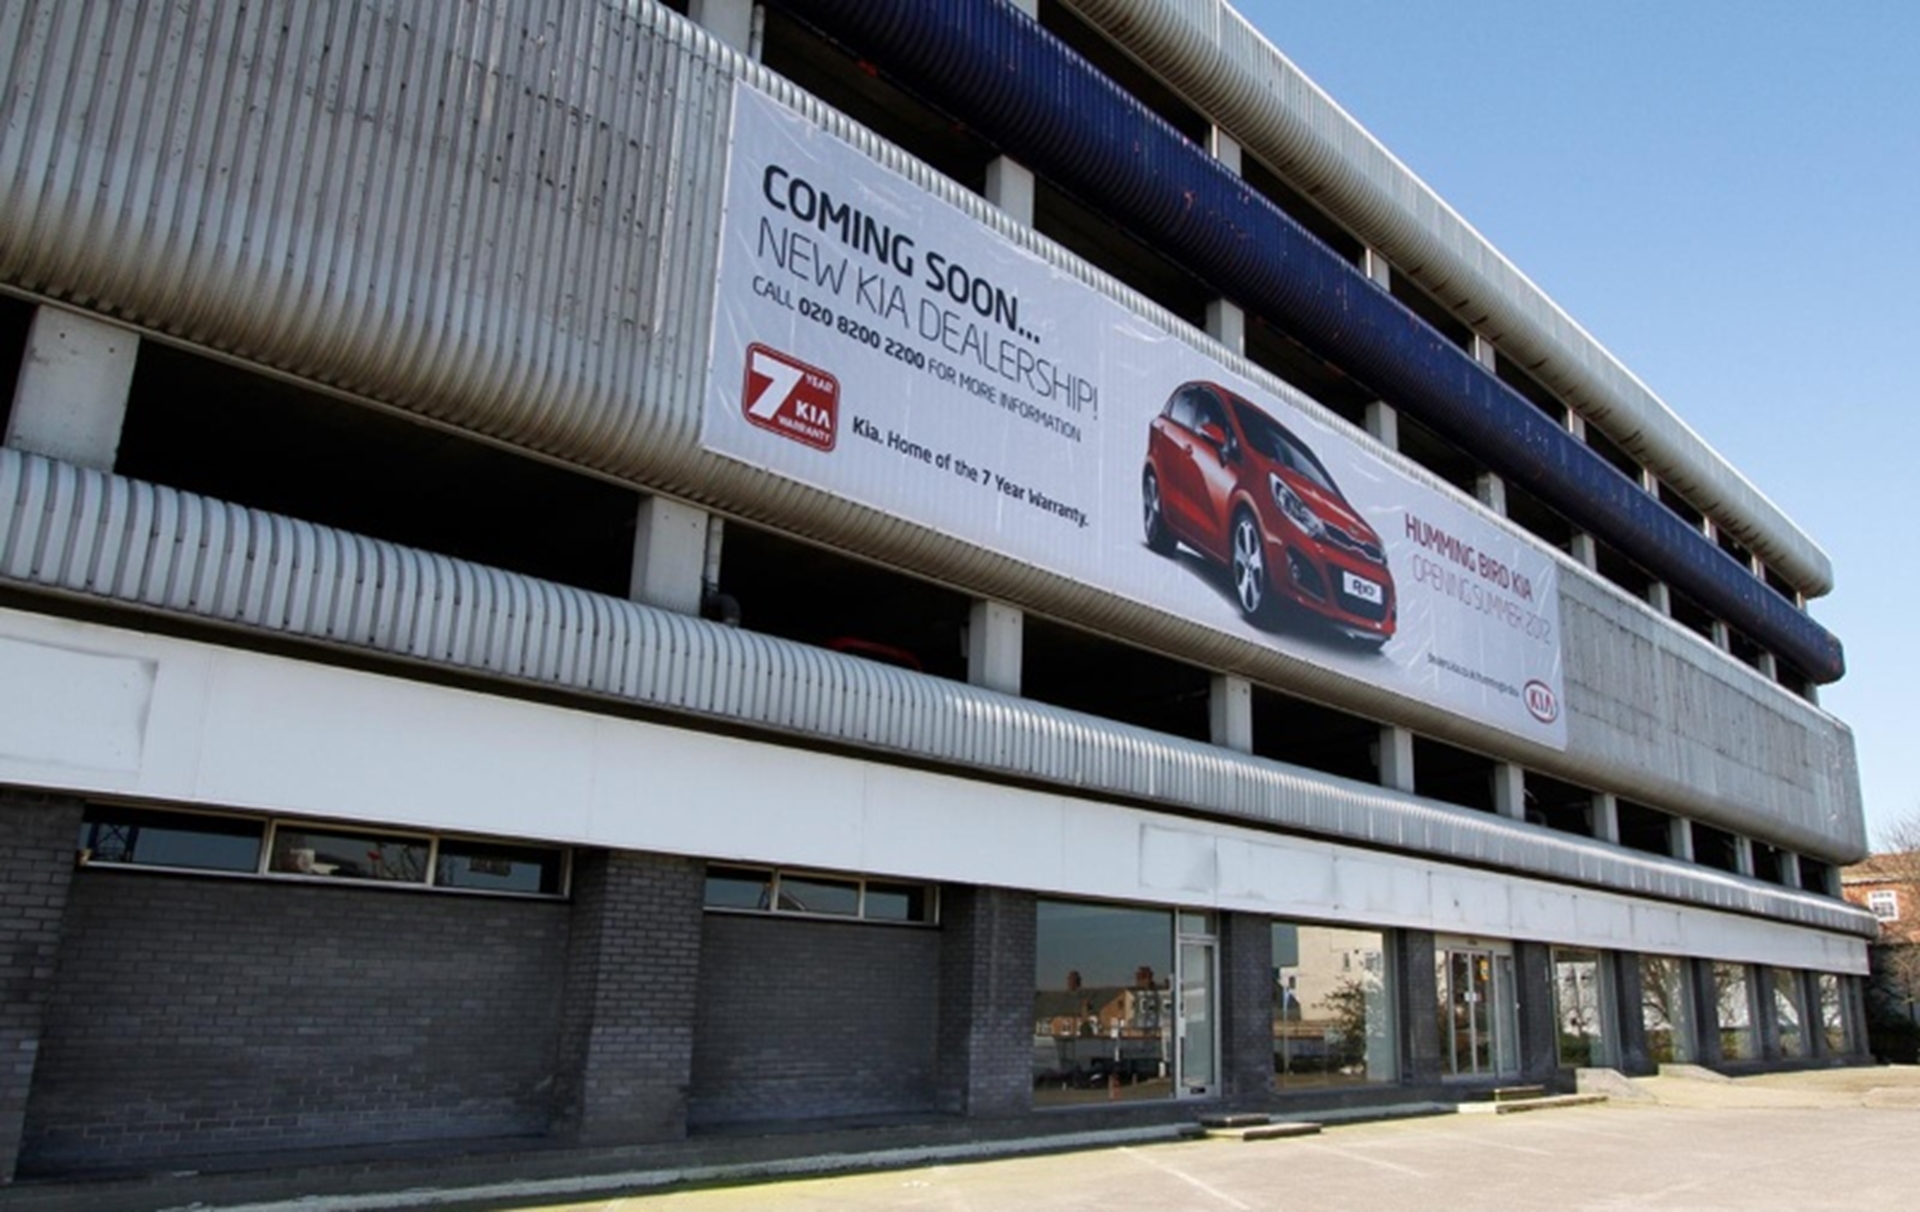 KIA STARTS WORK ON A MAJOR NEW NORTH LONDON DEALERSHIP – IN A CAR PARK!